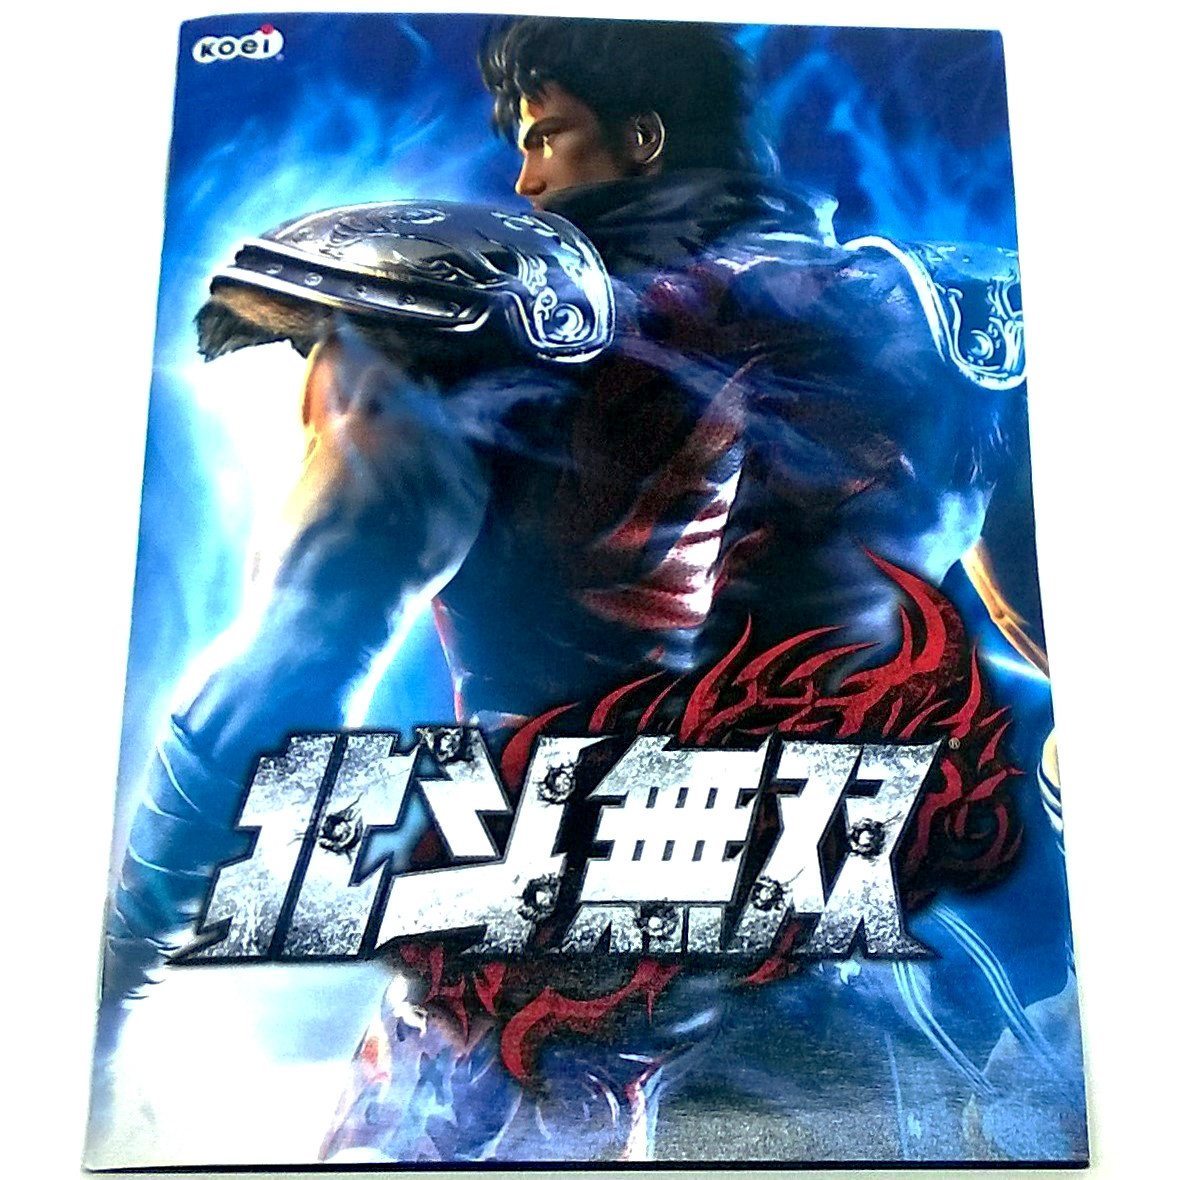 Hokuto Musou for PlayStation 3 (import) - Front of manual